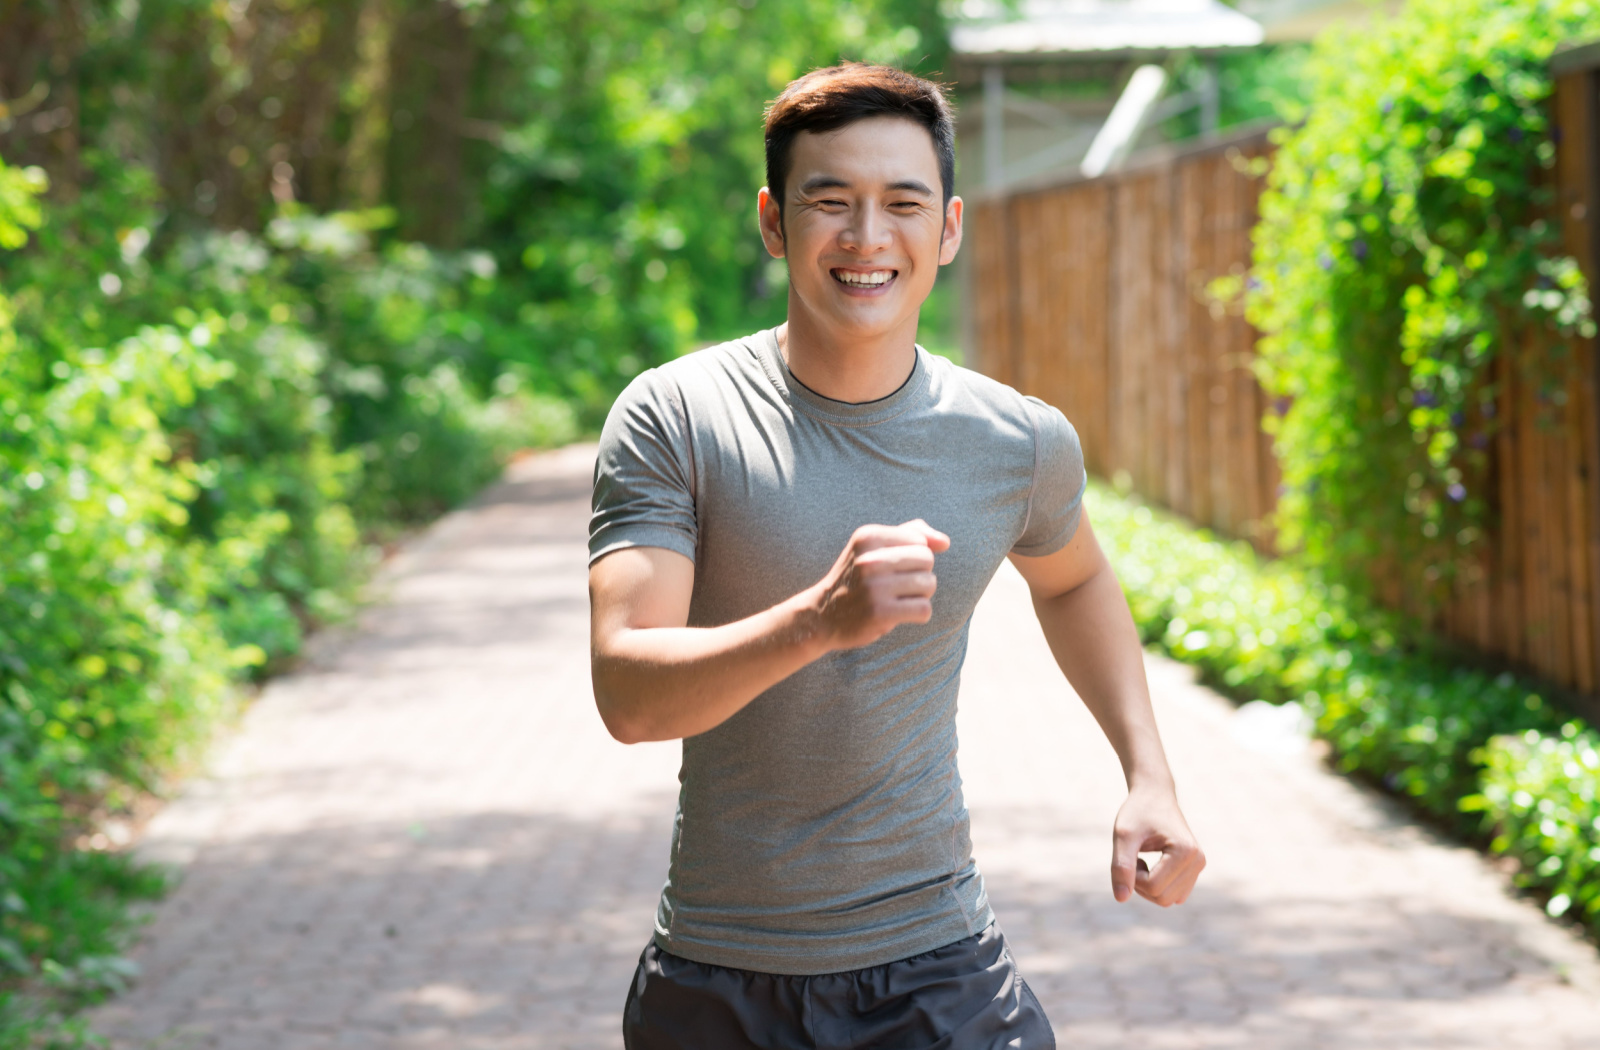 A happy and energetic young man on his morning jog.